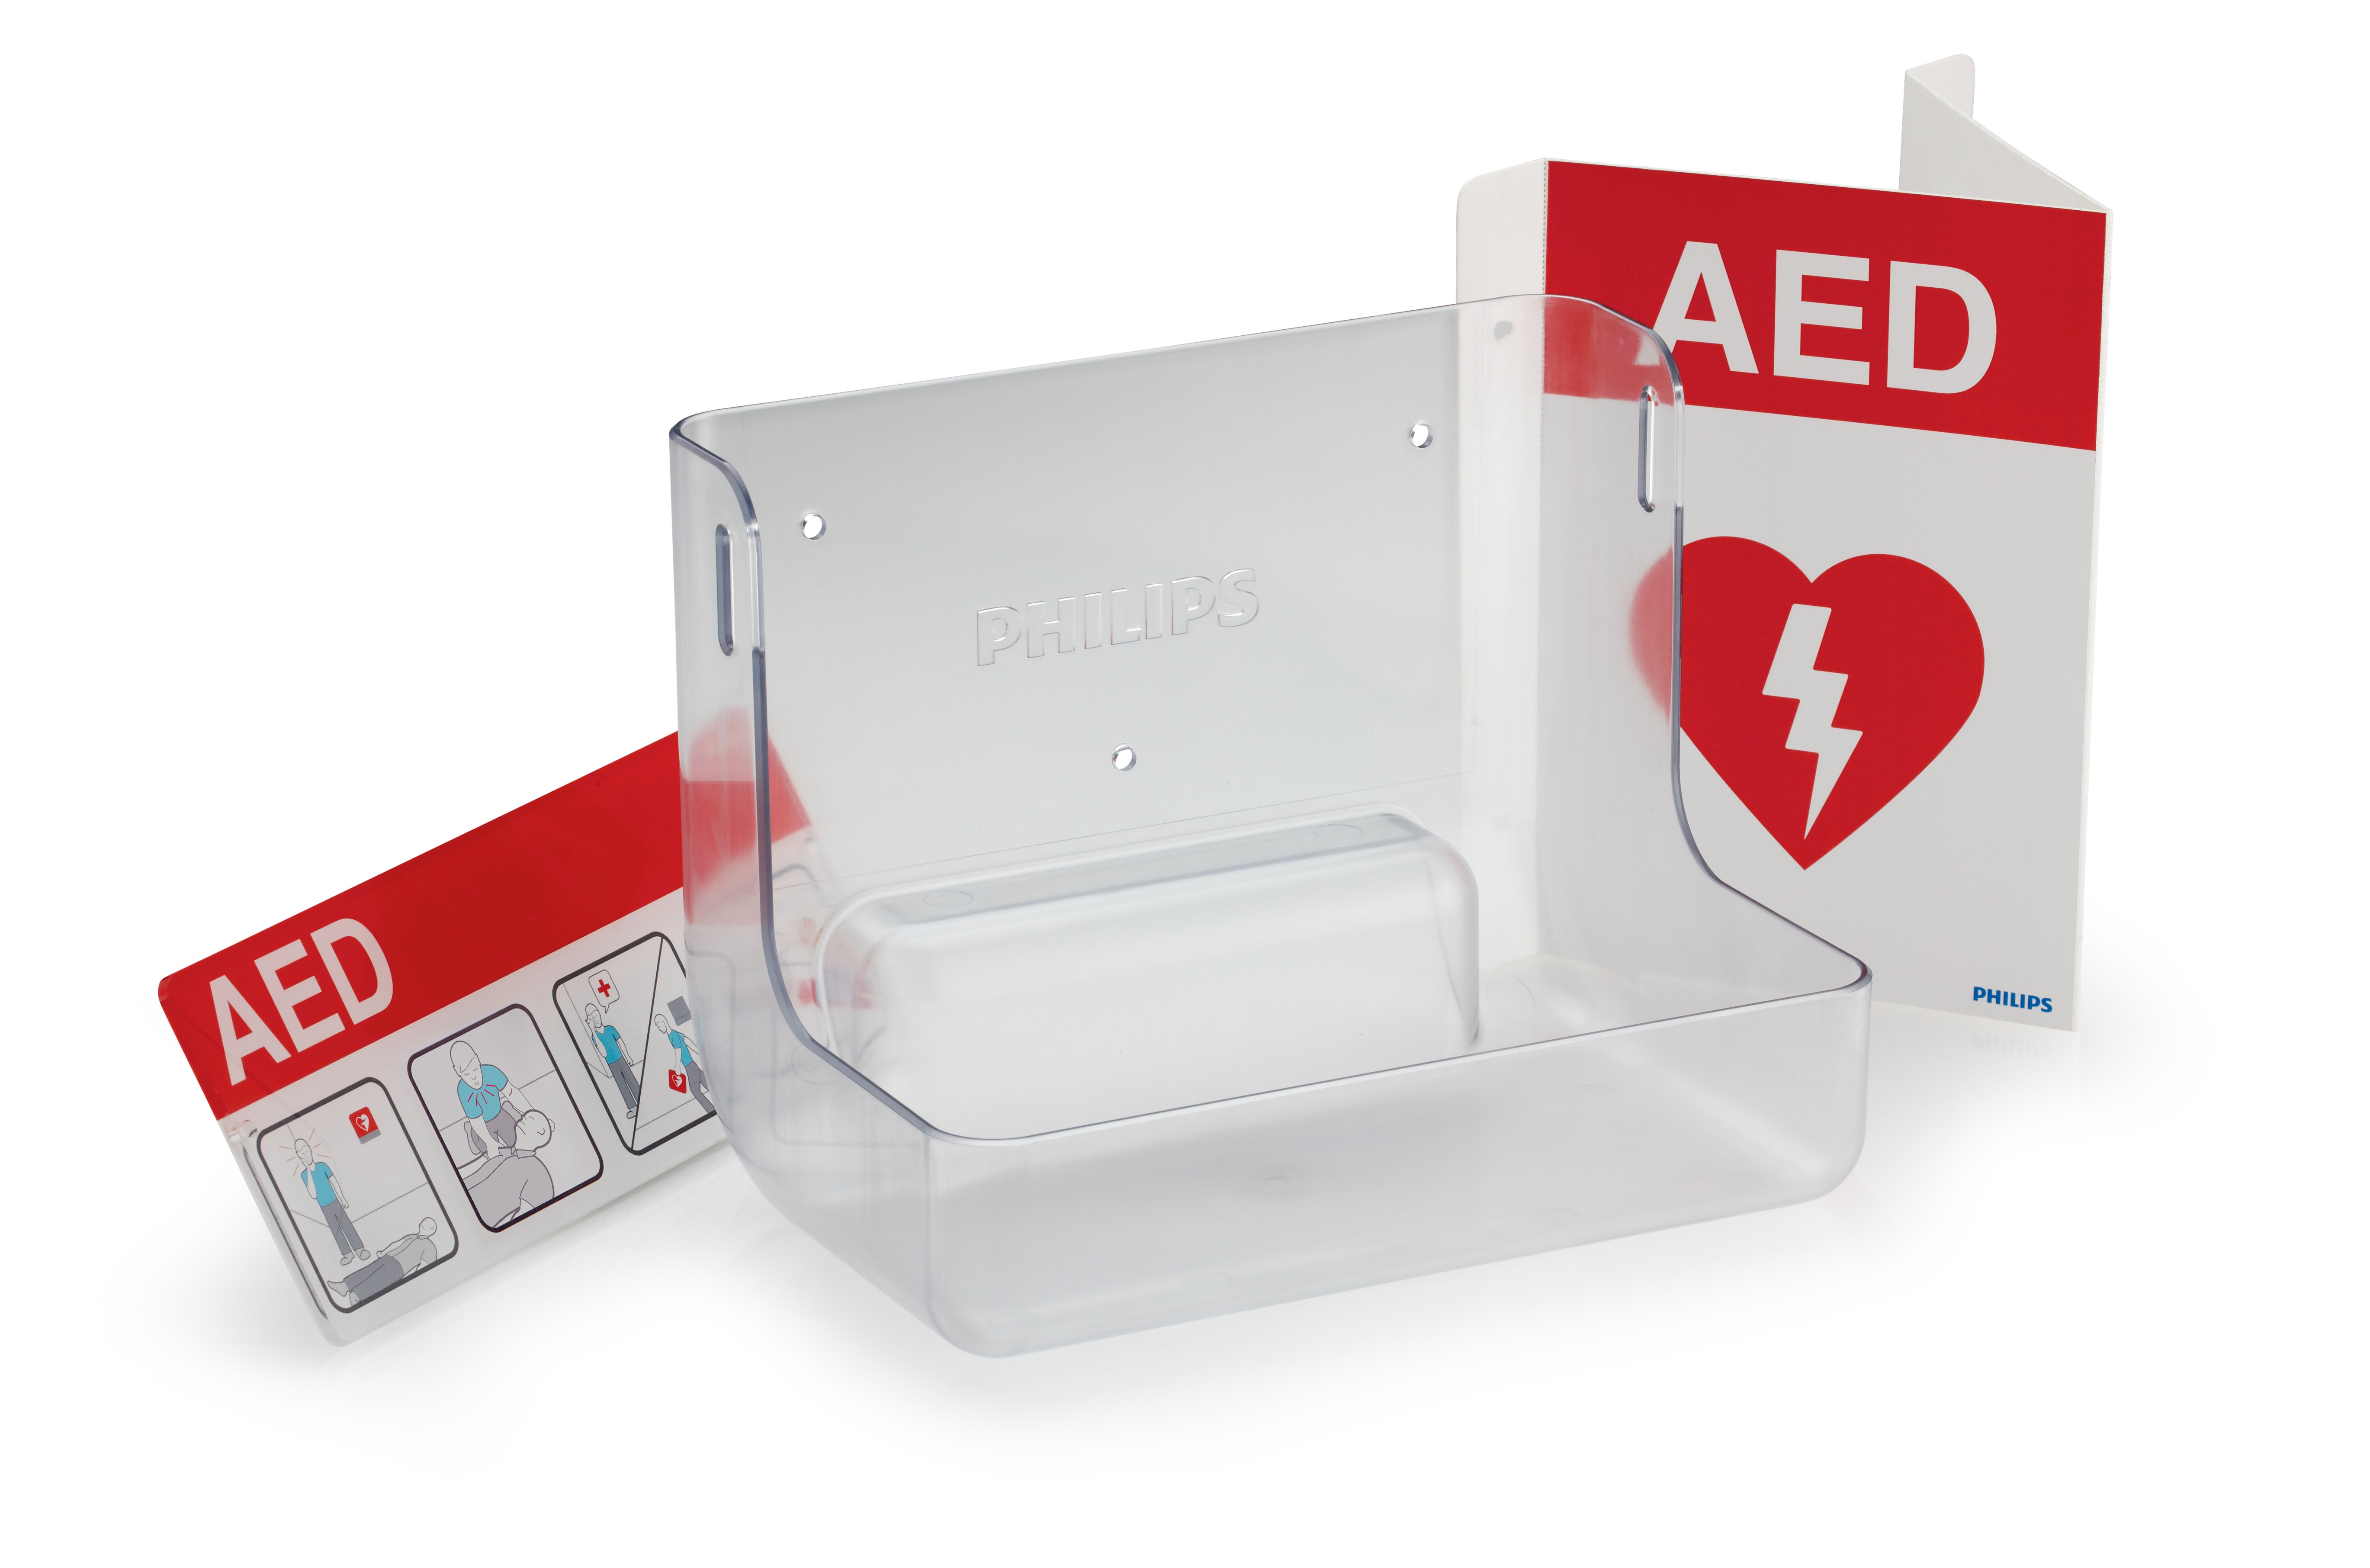 Philips AED wall mount & Signage Bundle 861477